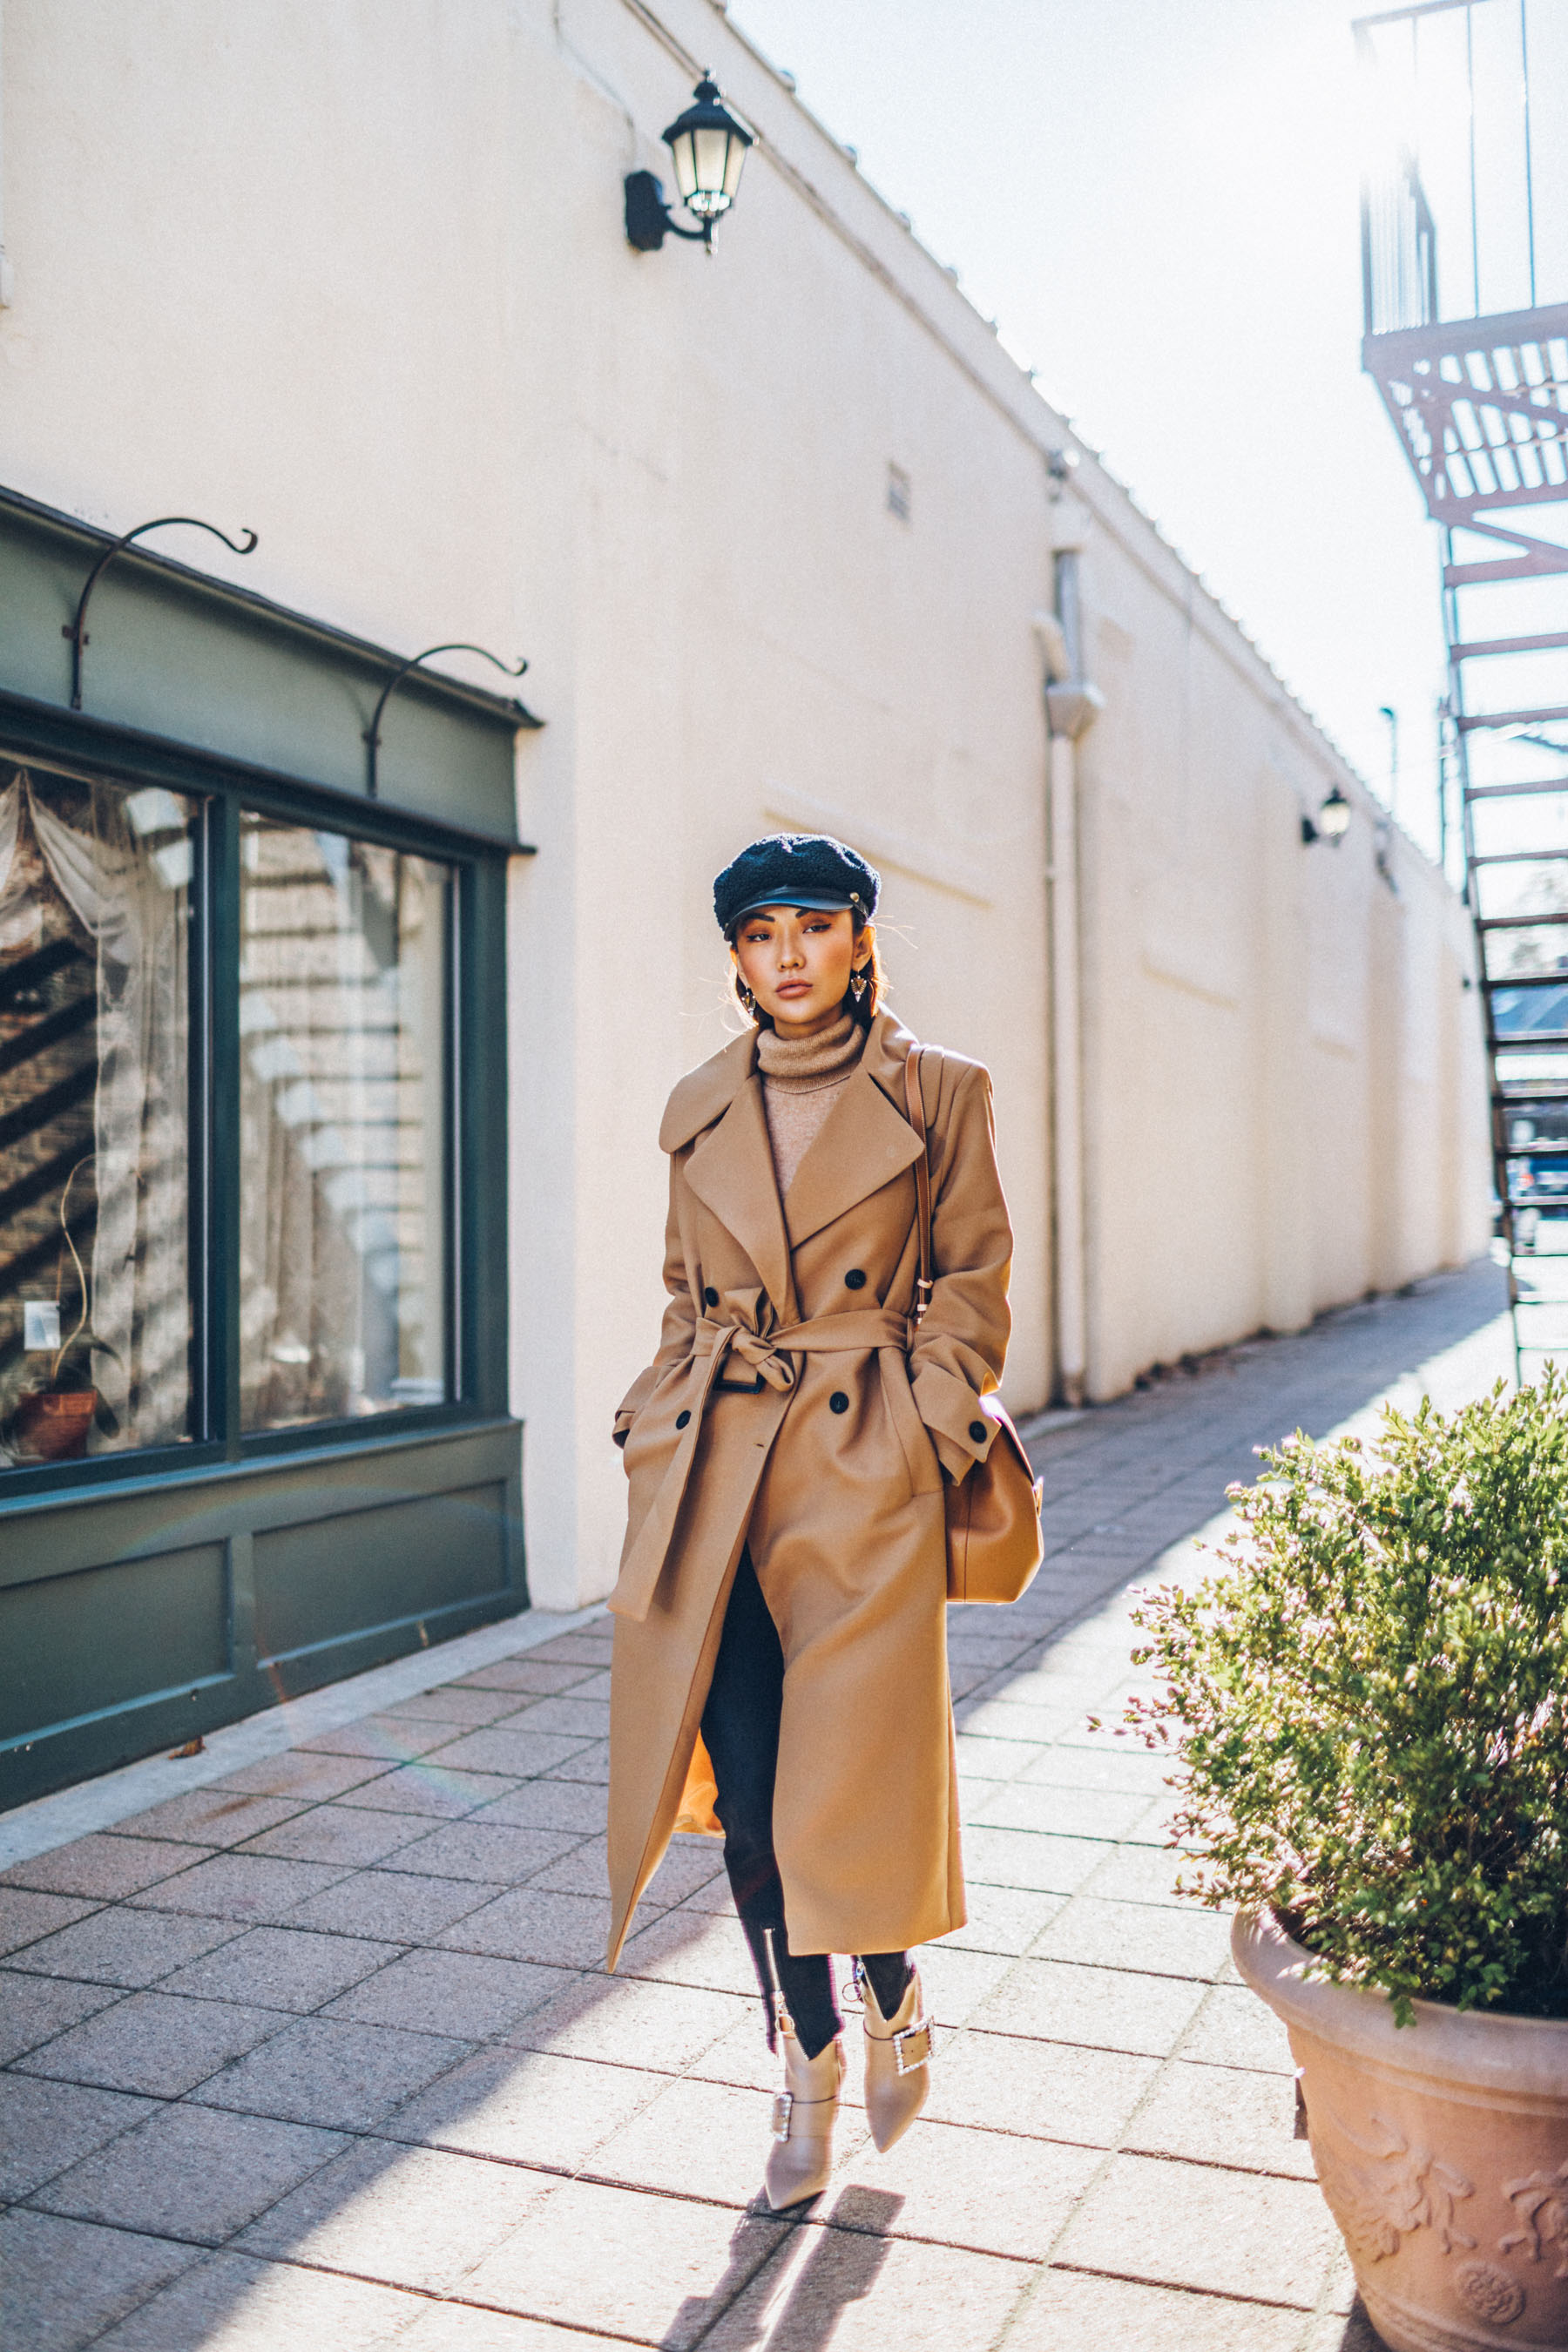 look more expensive, Belted Camel Coat with Dark Denim Baker Boy Cap and Satchel, New York fashion blogger, asian blogger, classic camel coat, winter outfit, classic winter outfit, cozy layered outfut, nude boots, nude bag, baker boy hat, how to style camel coat, jessica wang, fashion blogger, street style, fashion blogger street style, oversized coat, duster coat, maxi coat // Notjessfashion.com